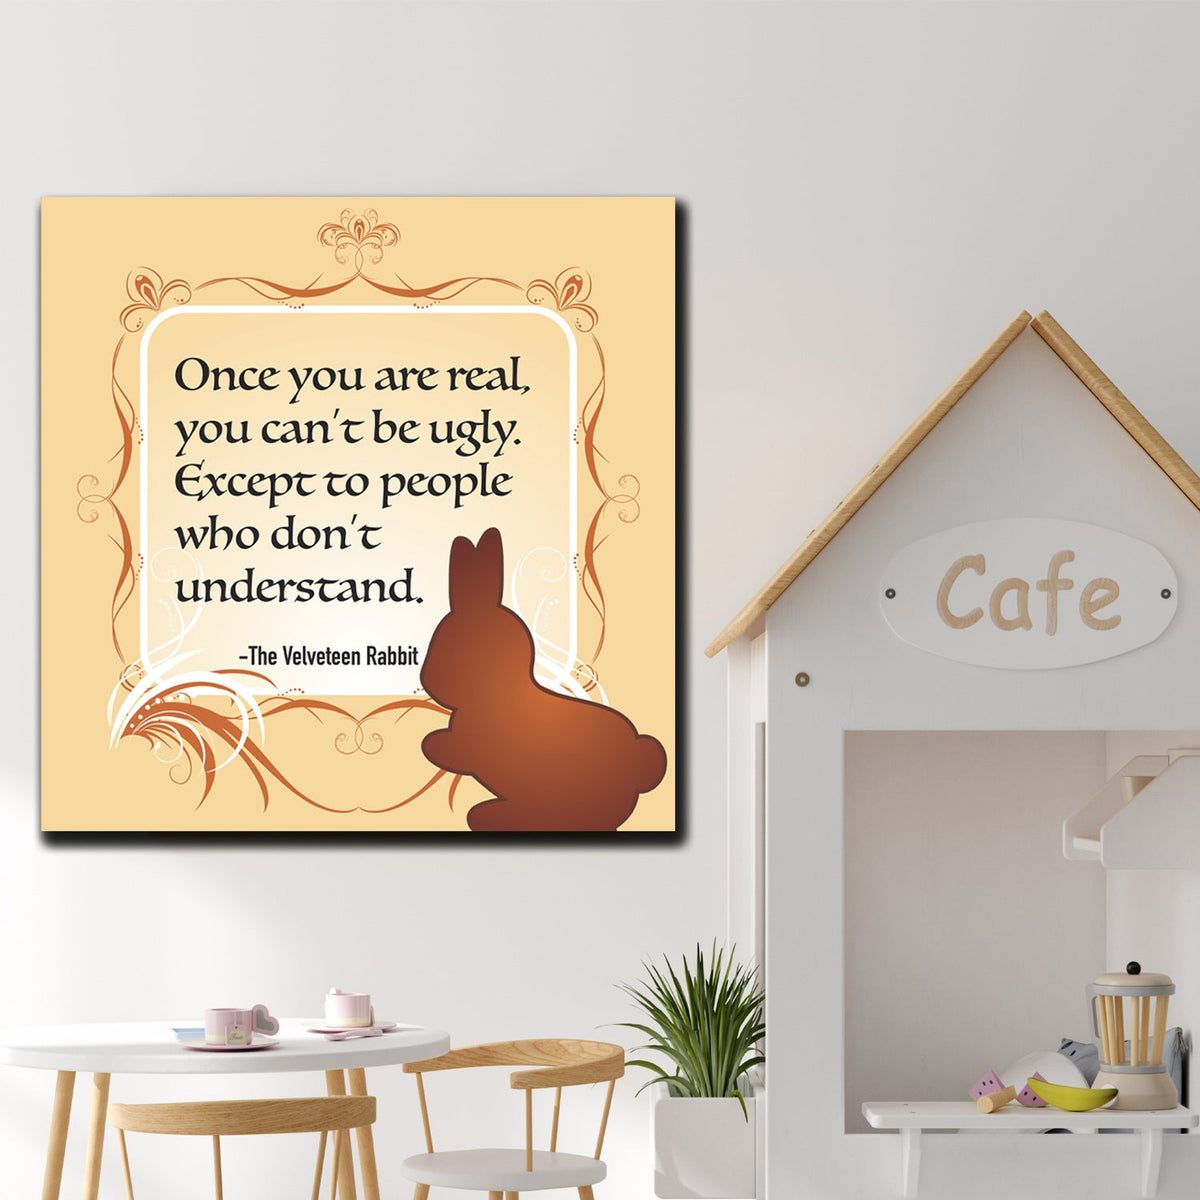 https://cdn.shopify.com/s/files/1/0387/9986/8044/products/TheVelveteenRabbitQuoteCanvasArtprintStretched-4.jpg